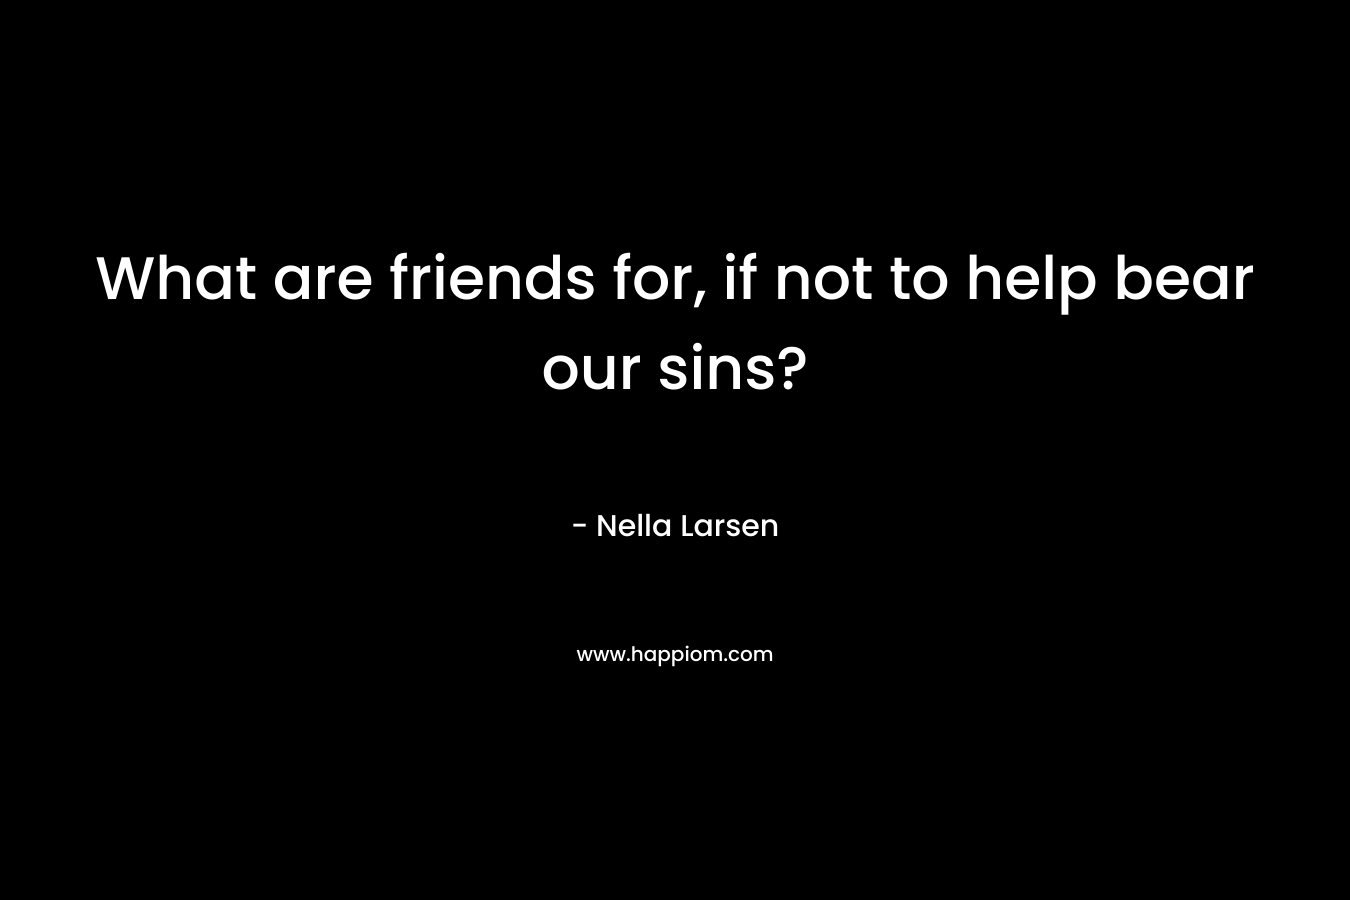 What are friends for, if not to help bear our sins?